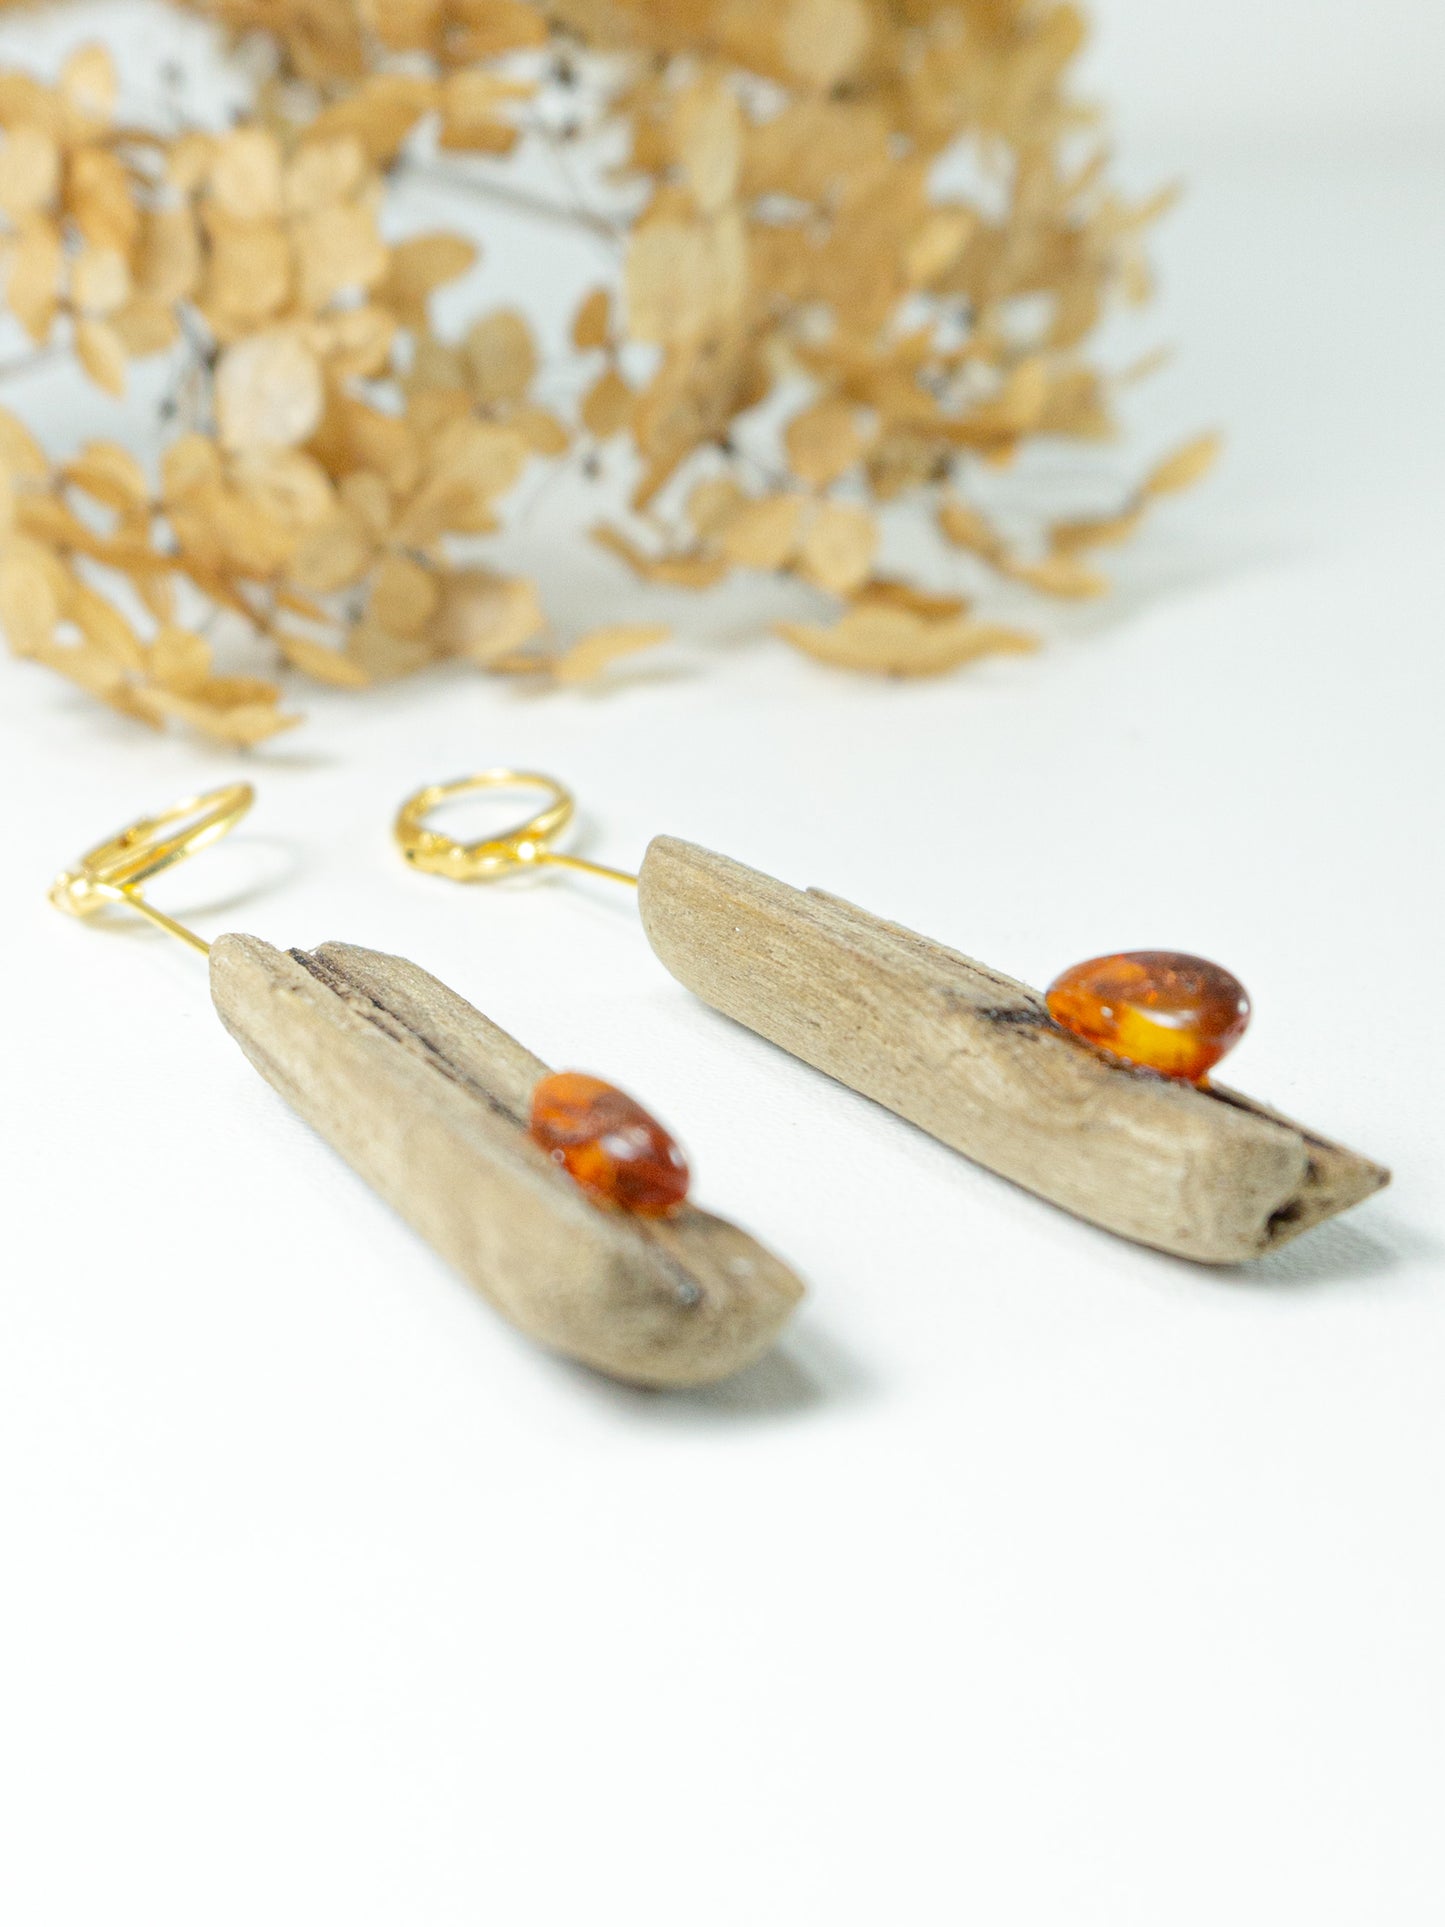 Driftwood Amber Earrings SILLI, gold-plated 925 Silver, handmade jewelry